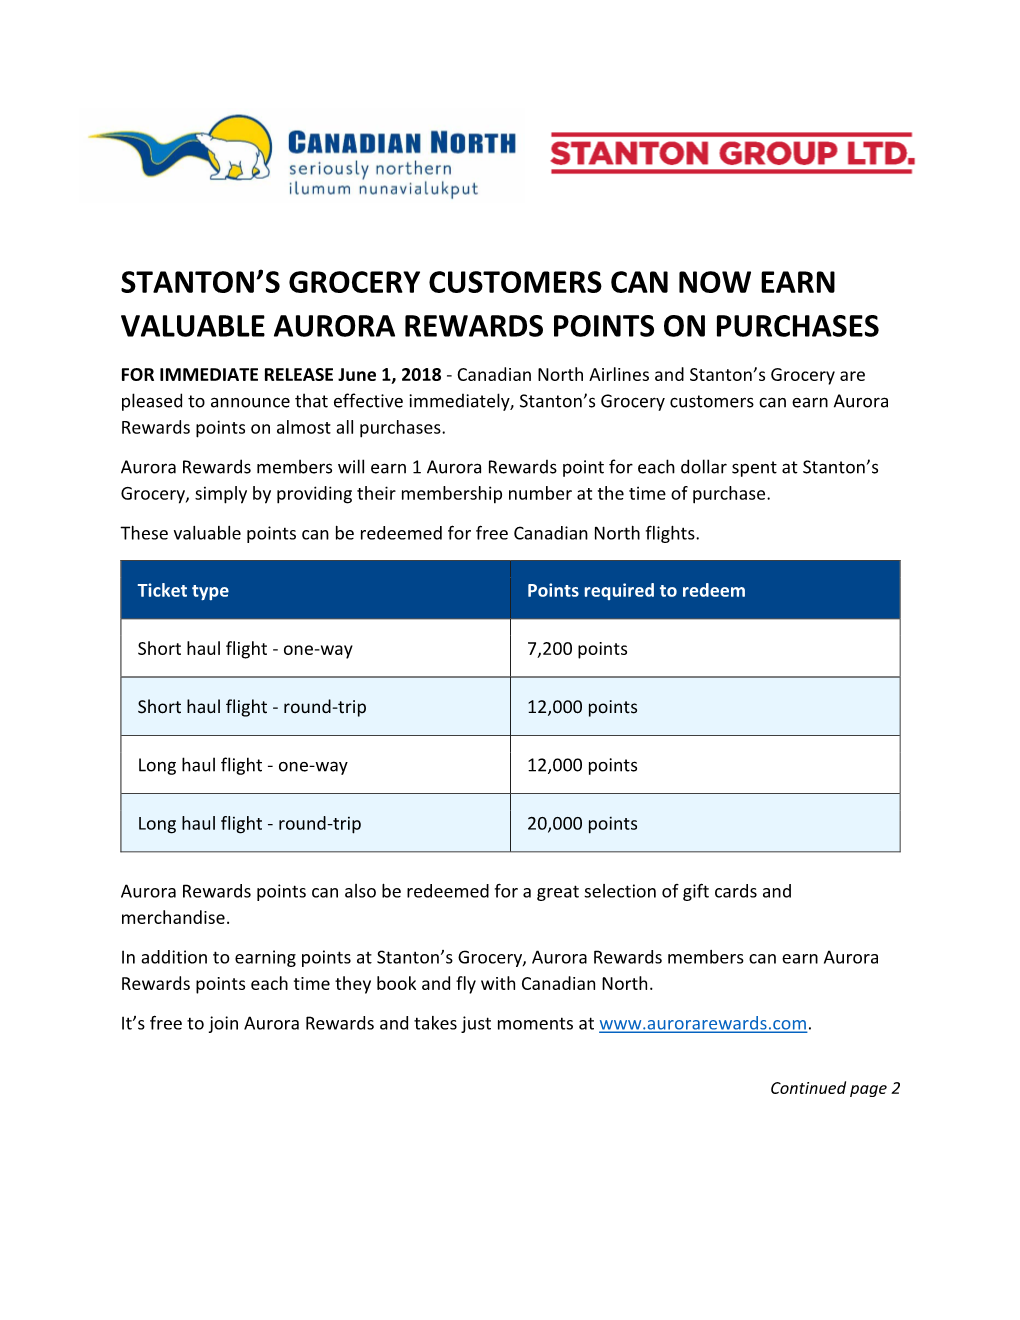 Stanton's Grocery Customers Can Now Earn